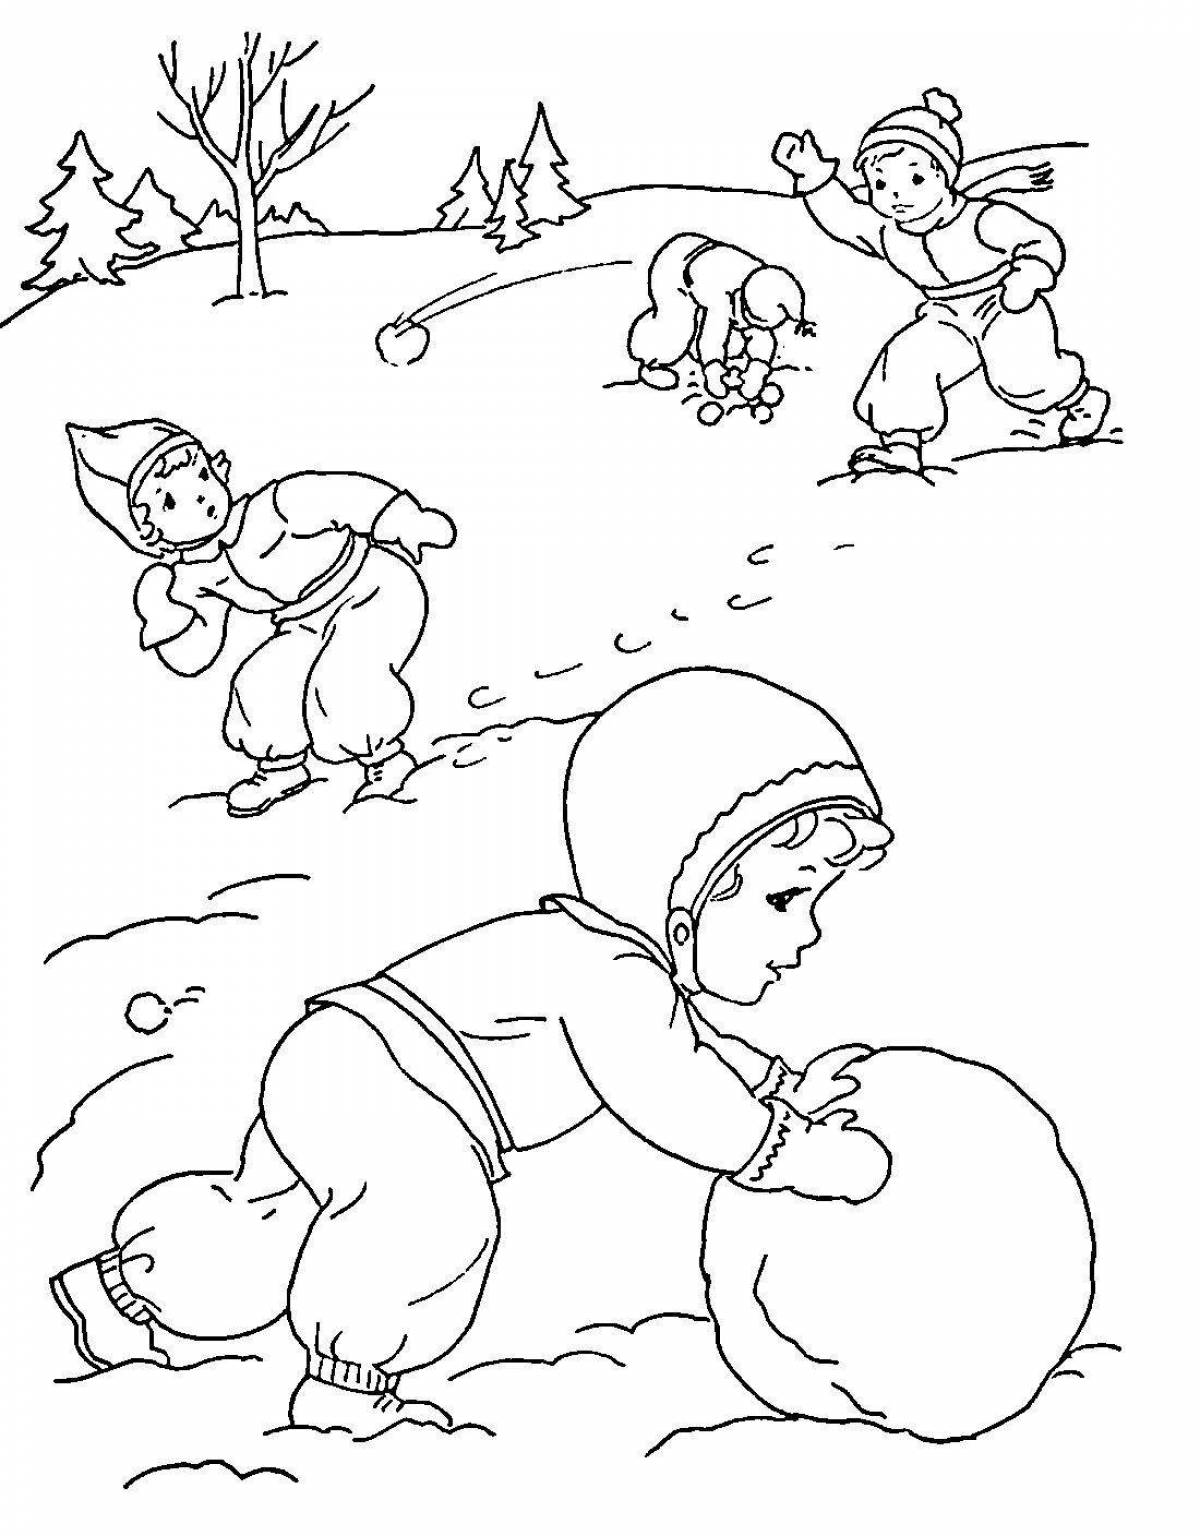 Fun junior group winter coloring page